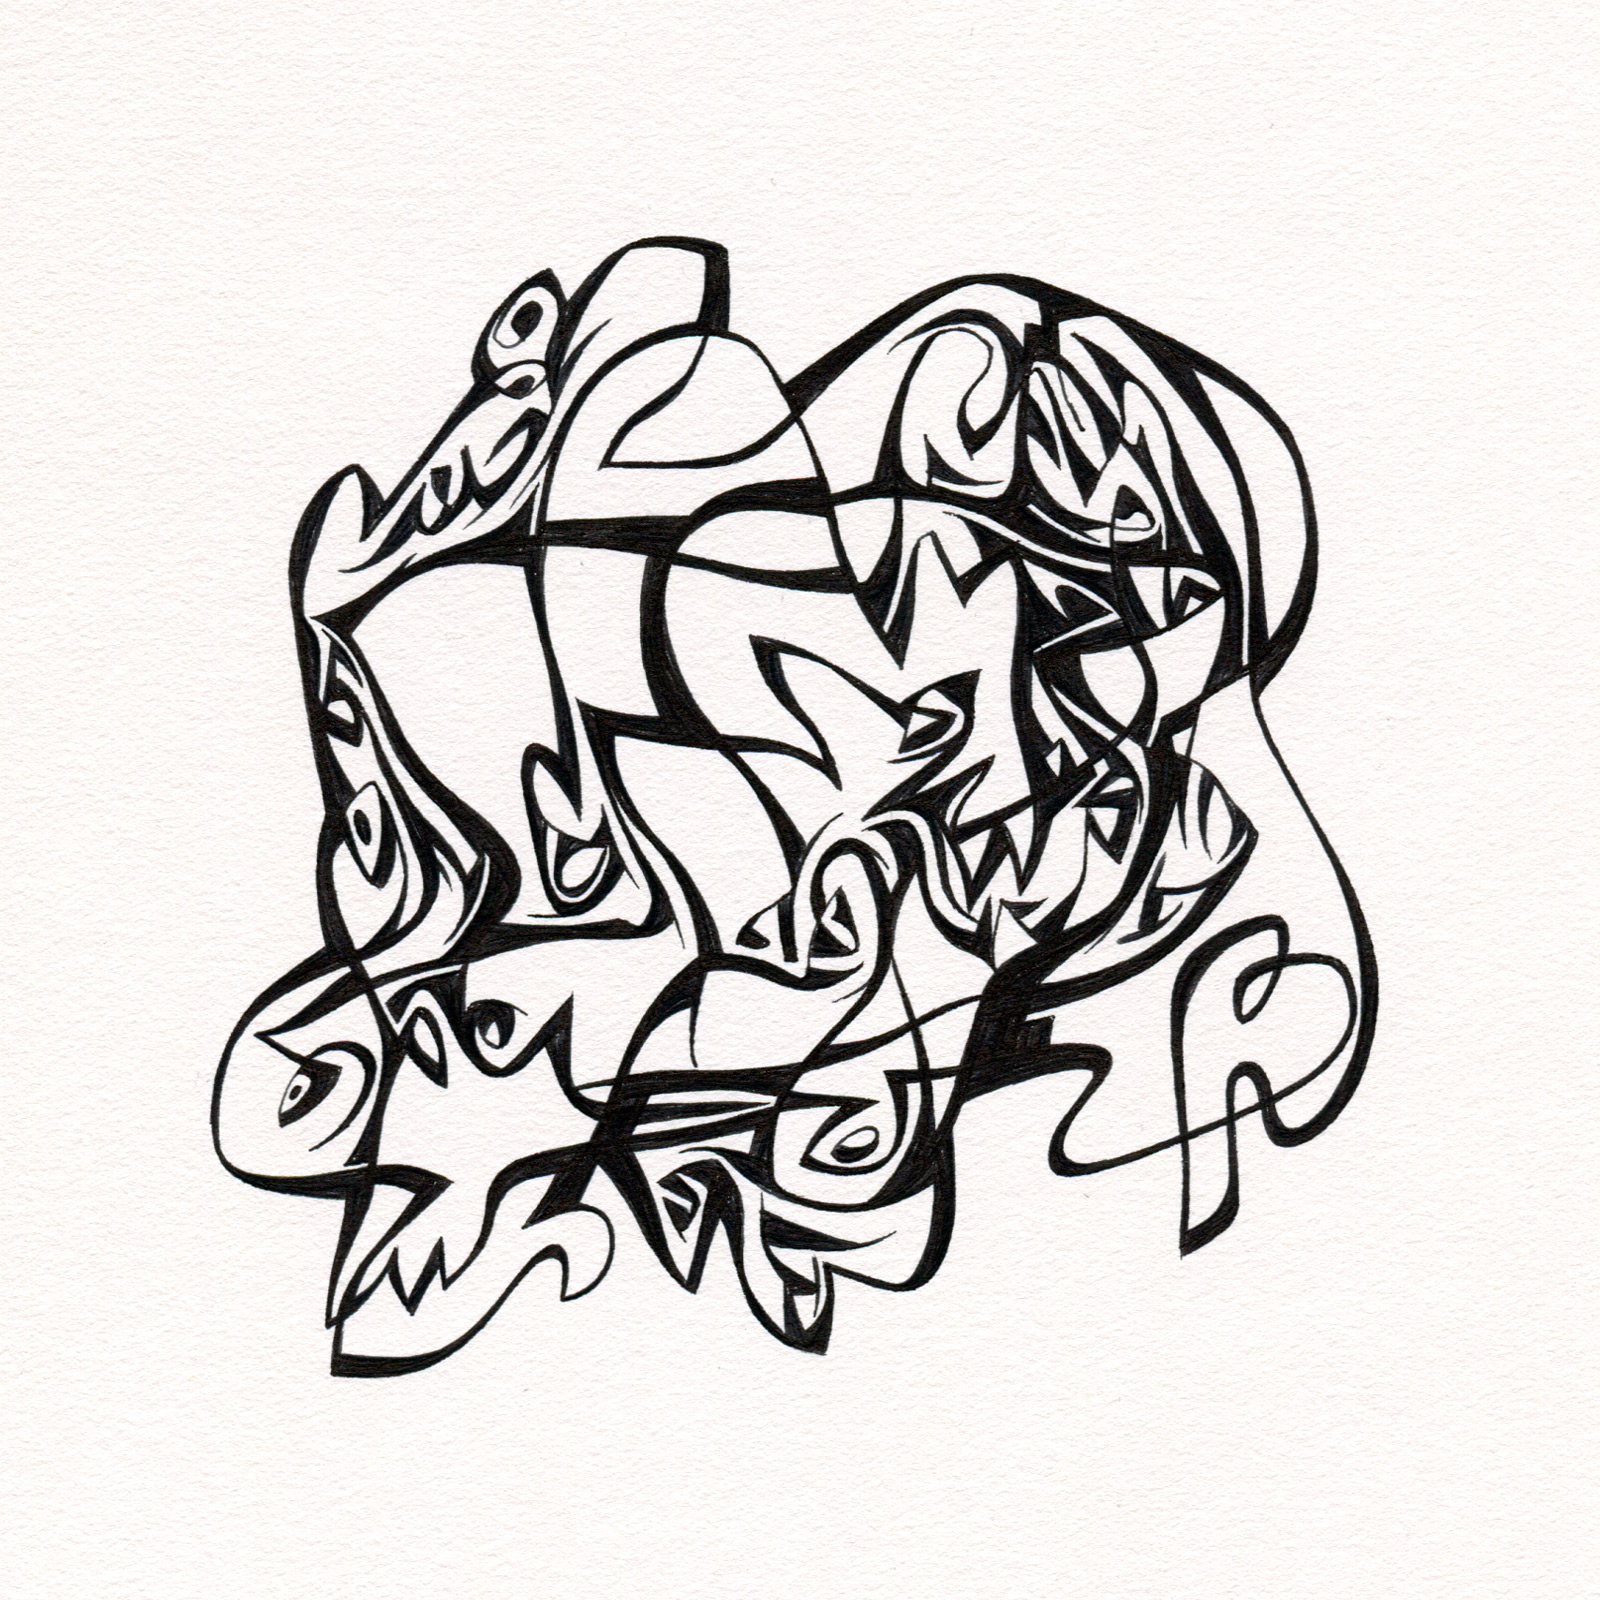   Untitled Ink Drawing #74 , 2015. Ink on paper. Approximately 5" x 5". 